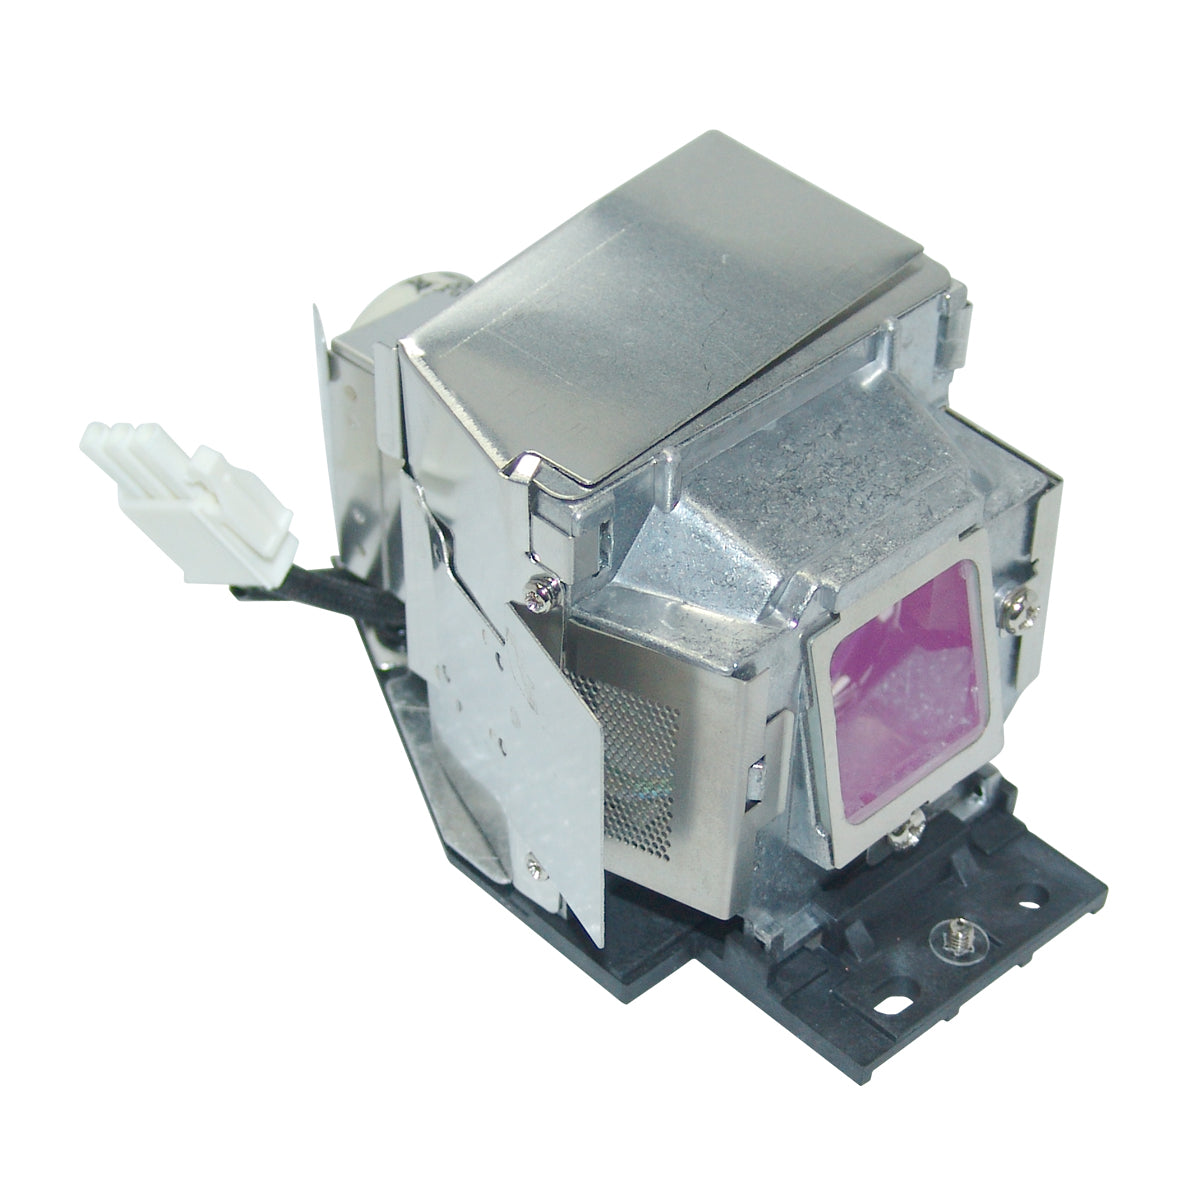 Philips 9144 000 01795 Philips Projector Lamp Module